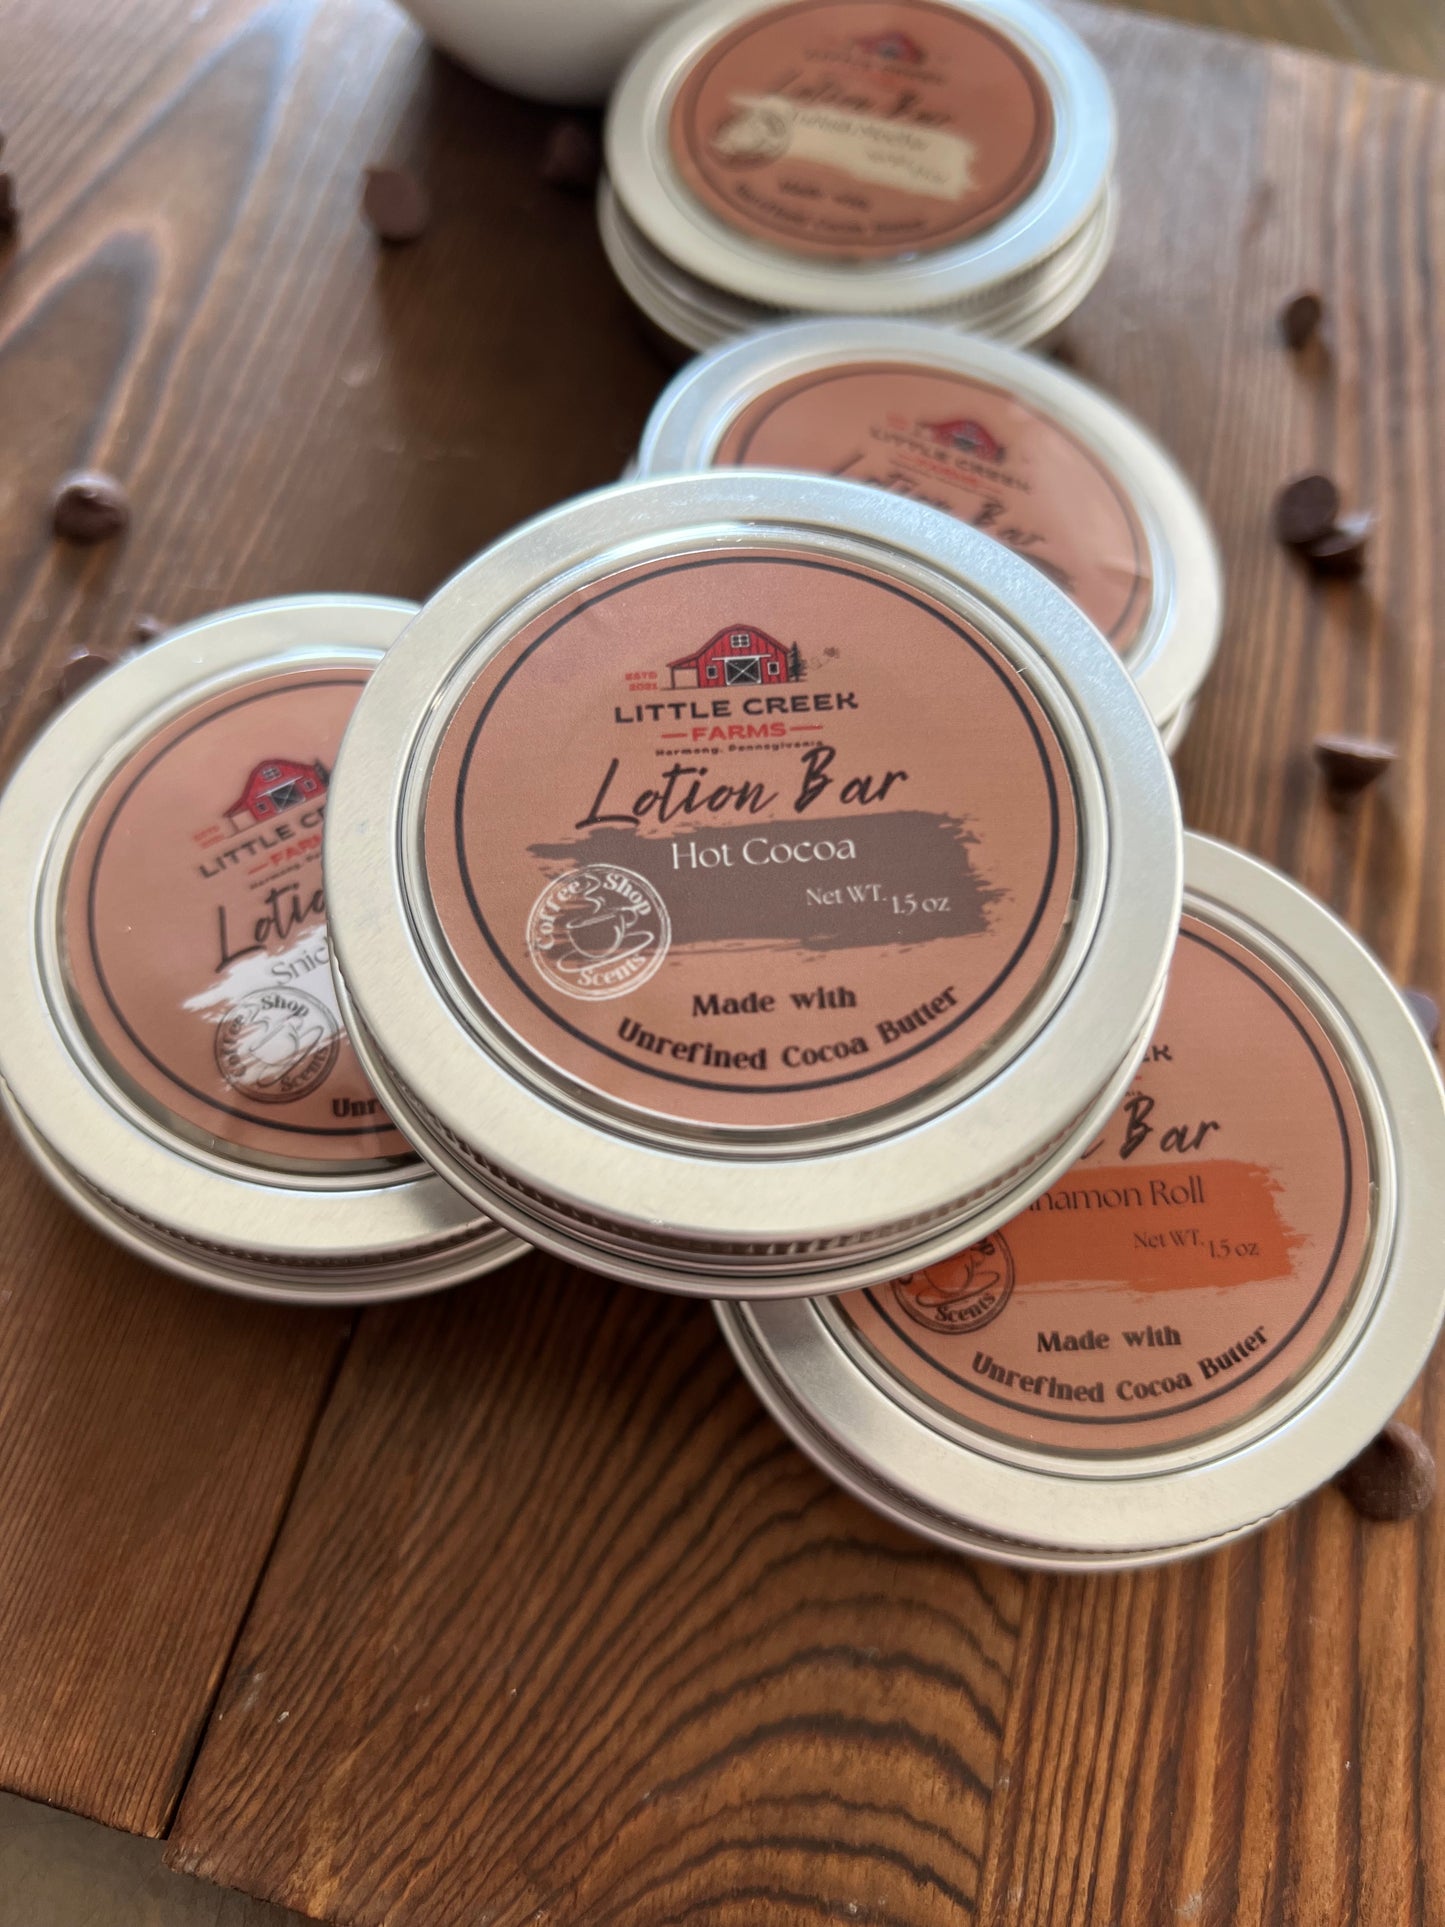 Solid Cocoa Butter Lotion Bars - 1.5oz - Coffee Shop Scents